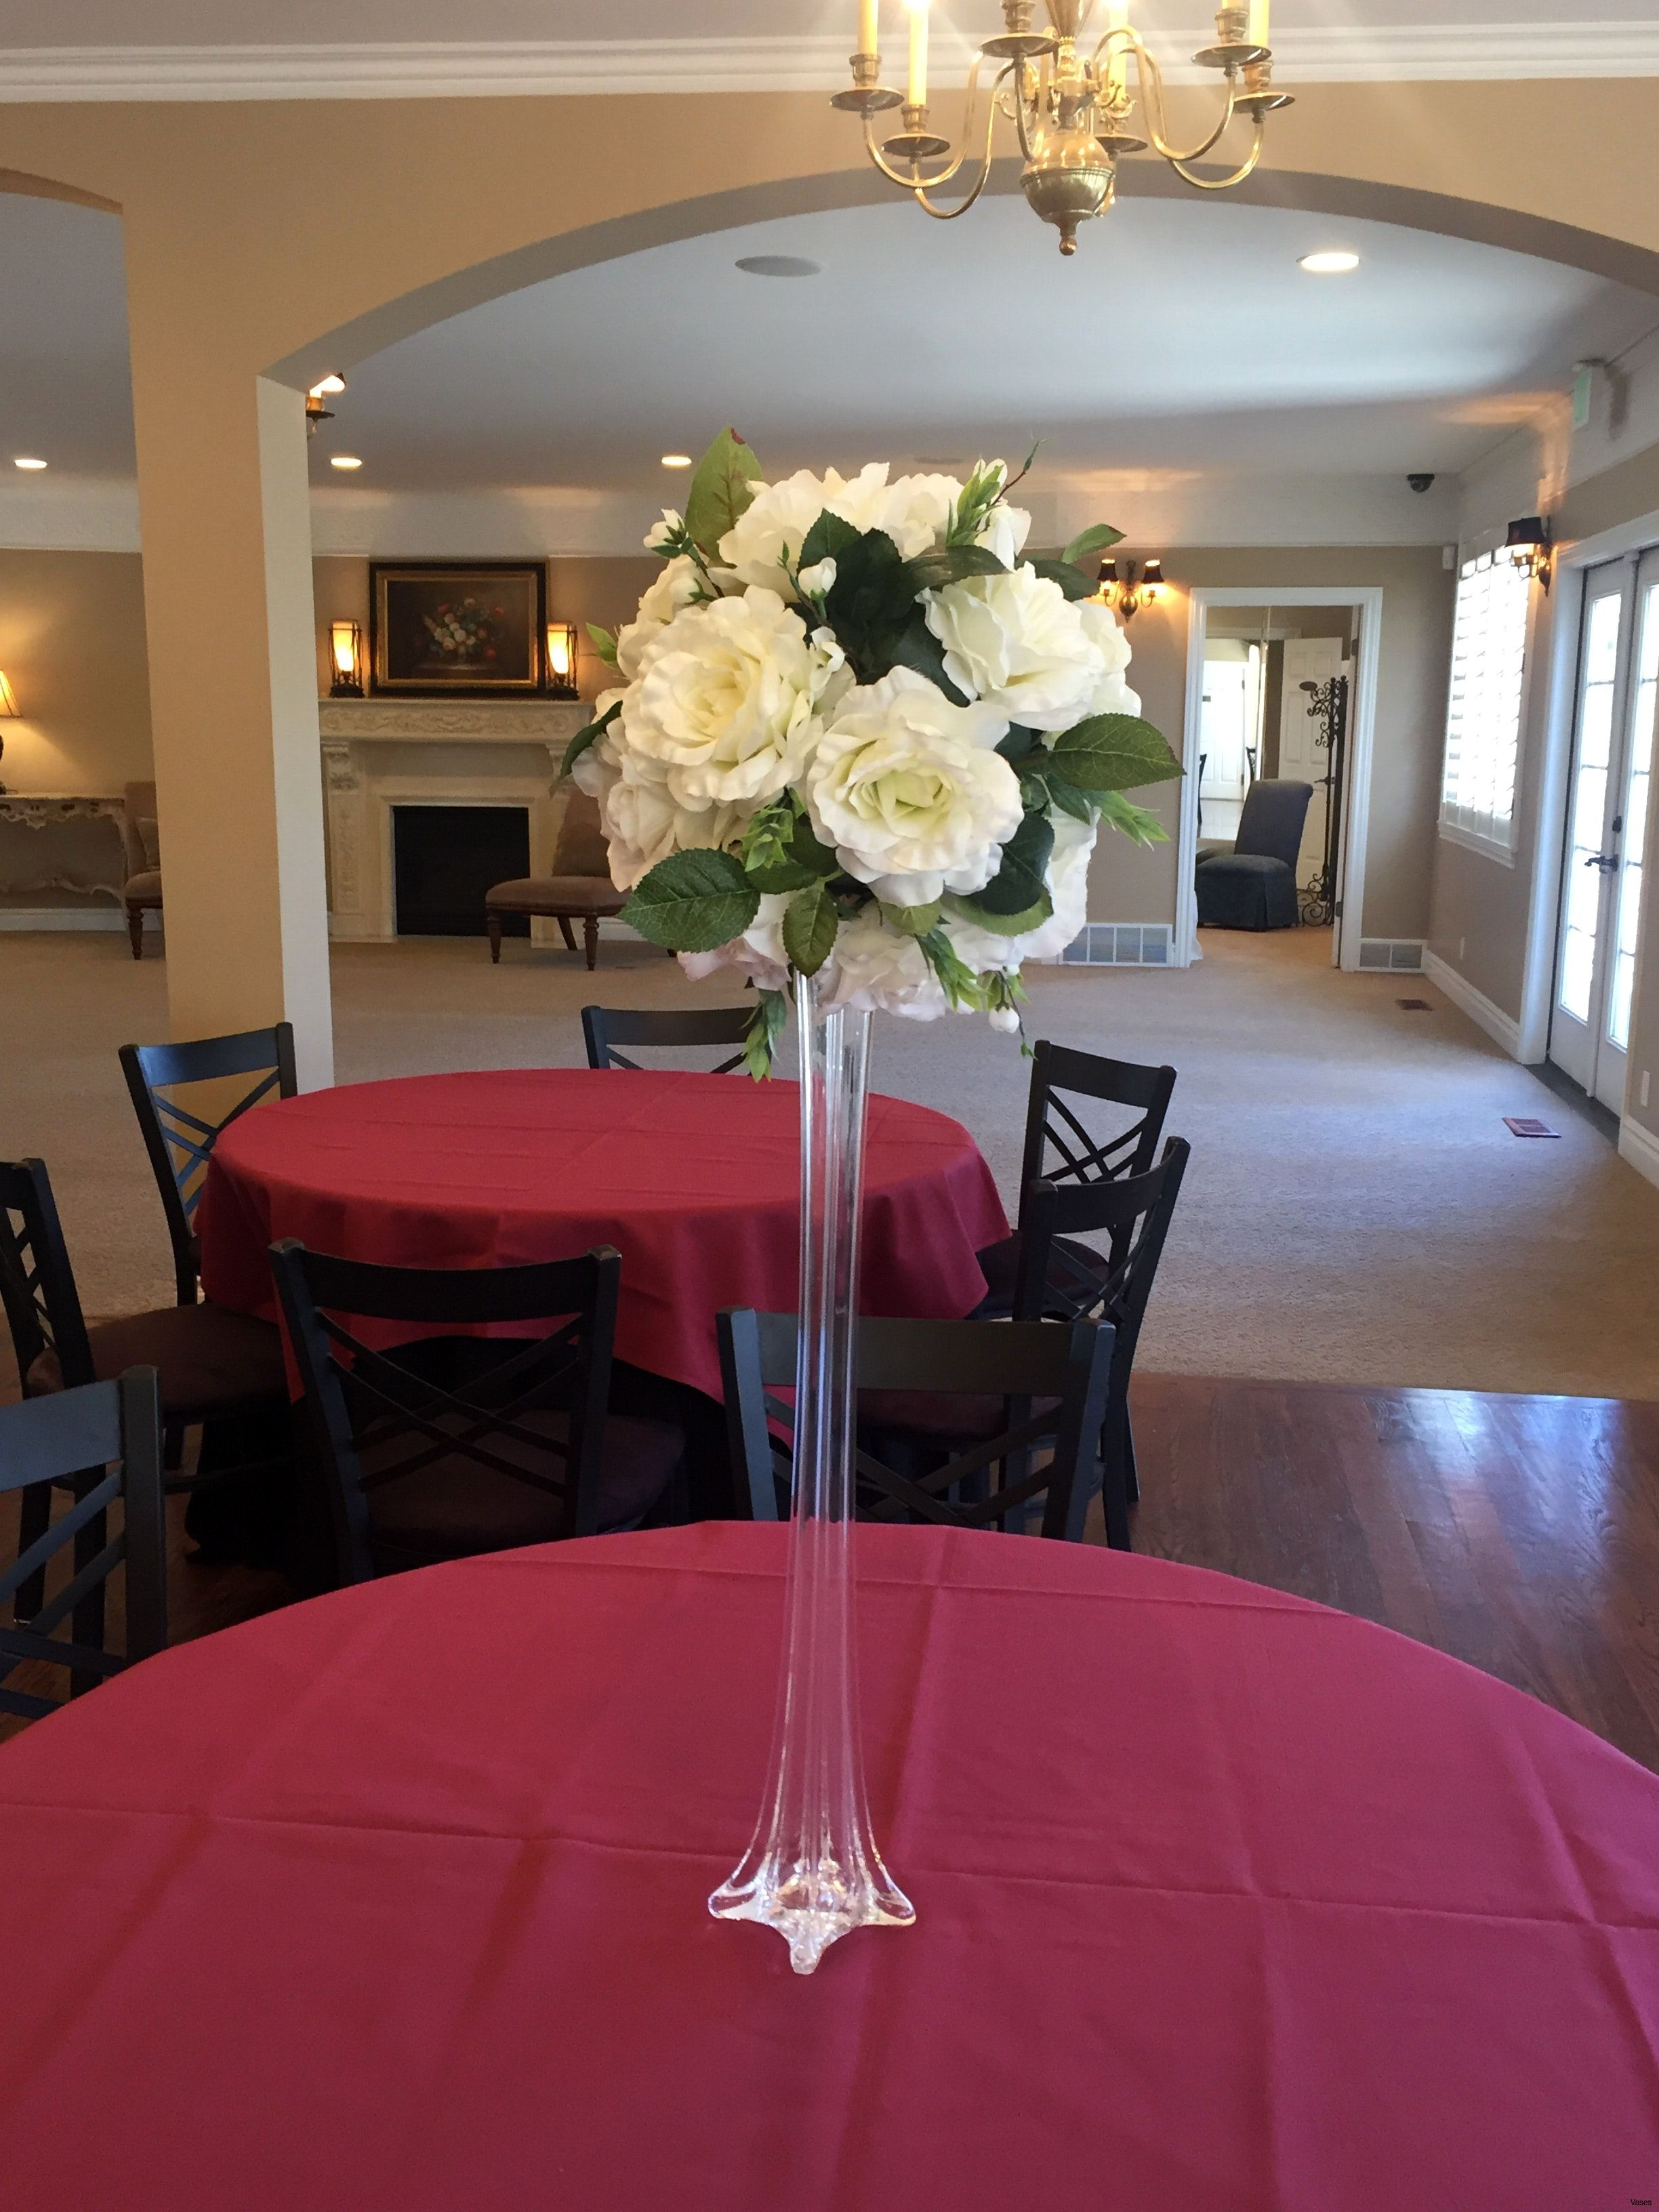 30 inch tall vases of 24 tall vases for sale the weekly world with regard to lovely wedding decoration rental